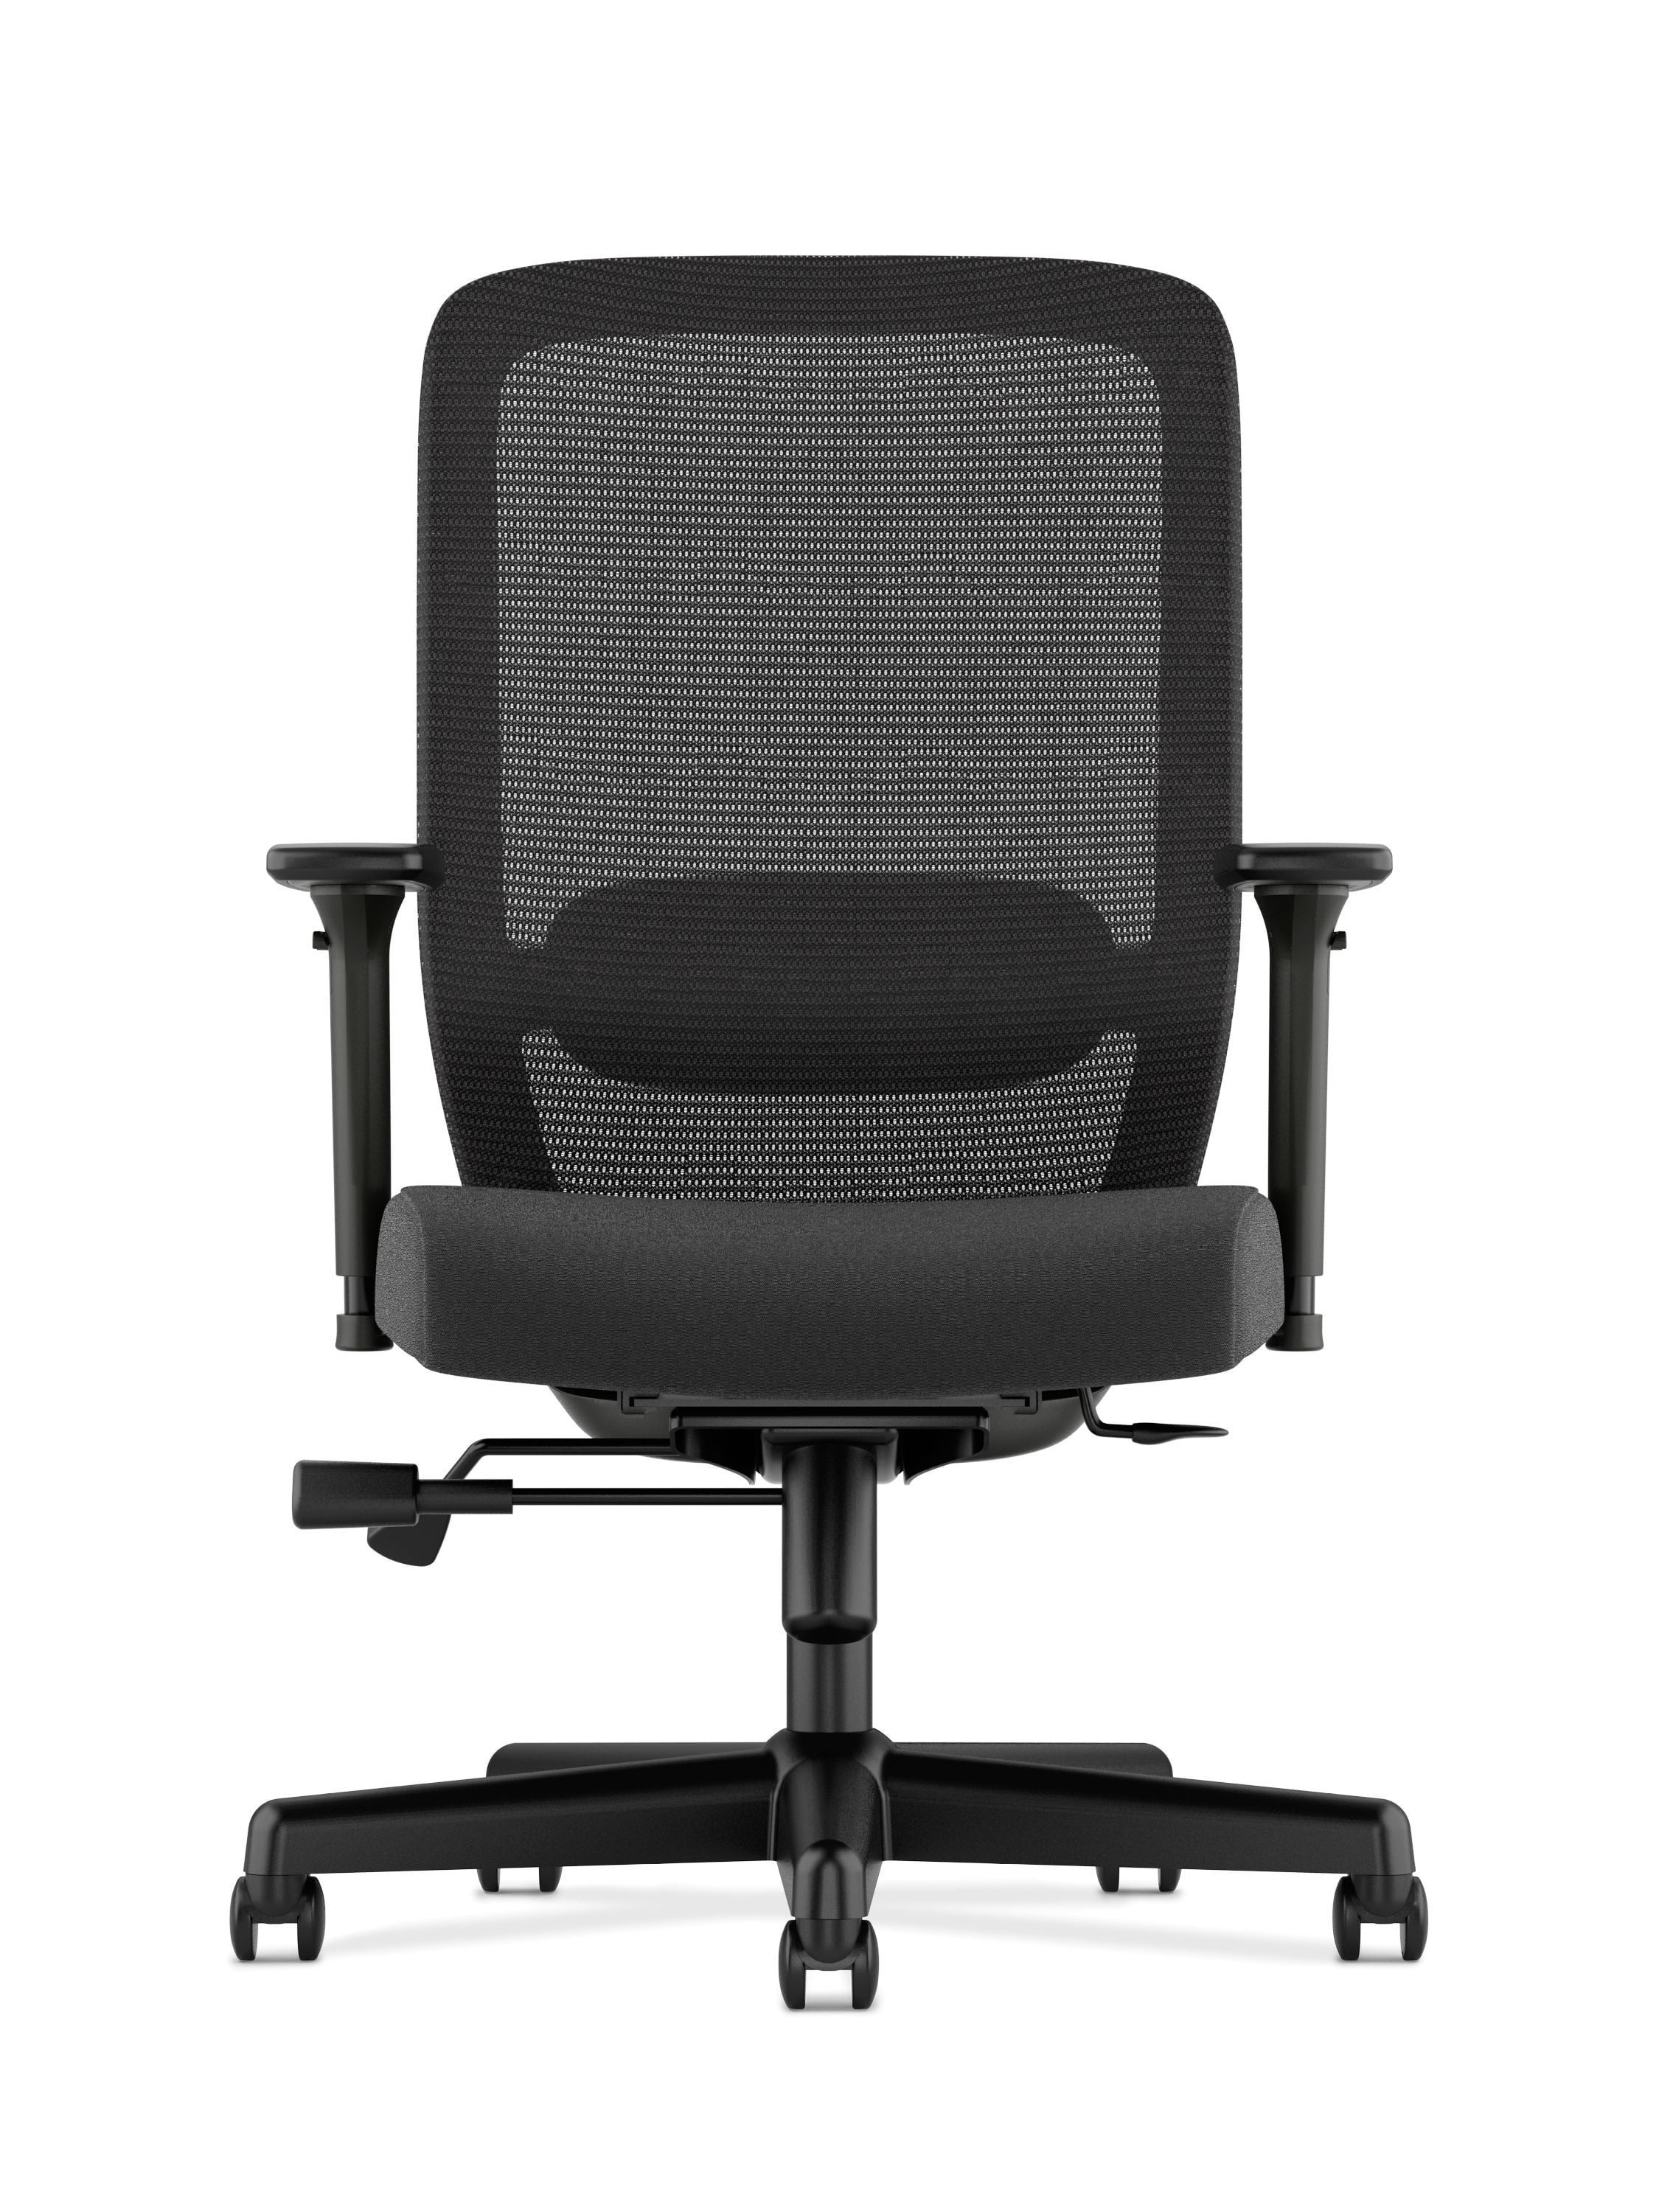 HVL721 Mesh High-Back Computer Chair with Leather Seat for Office Desk Black basyx by HON Mesh Task Chair 